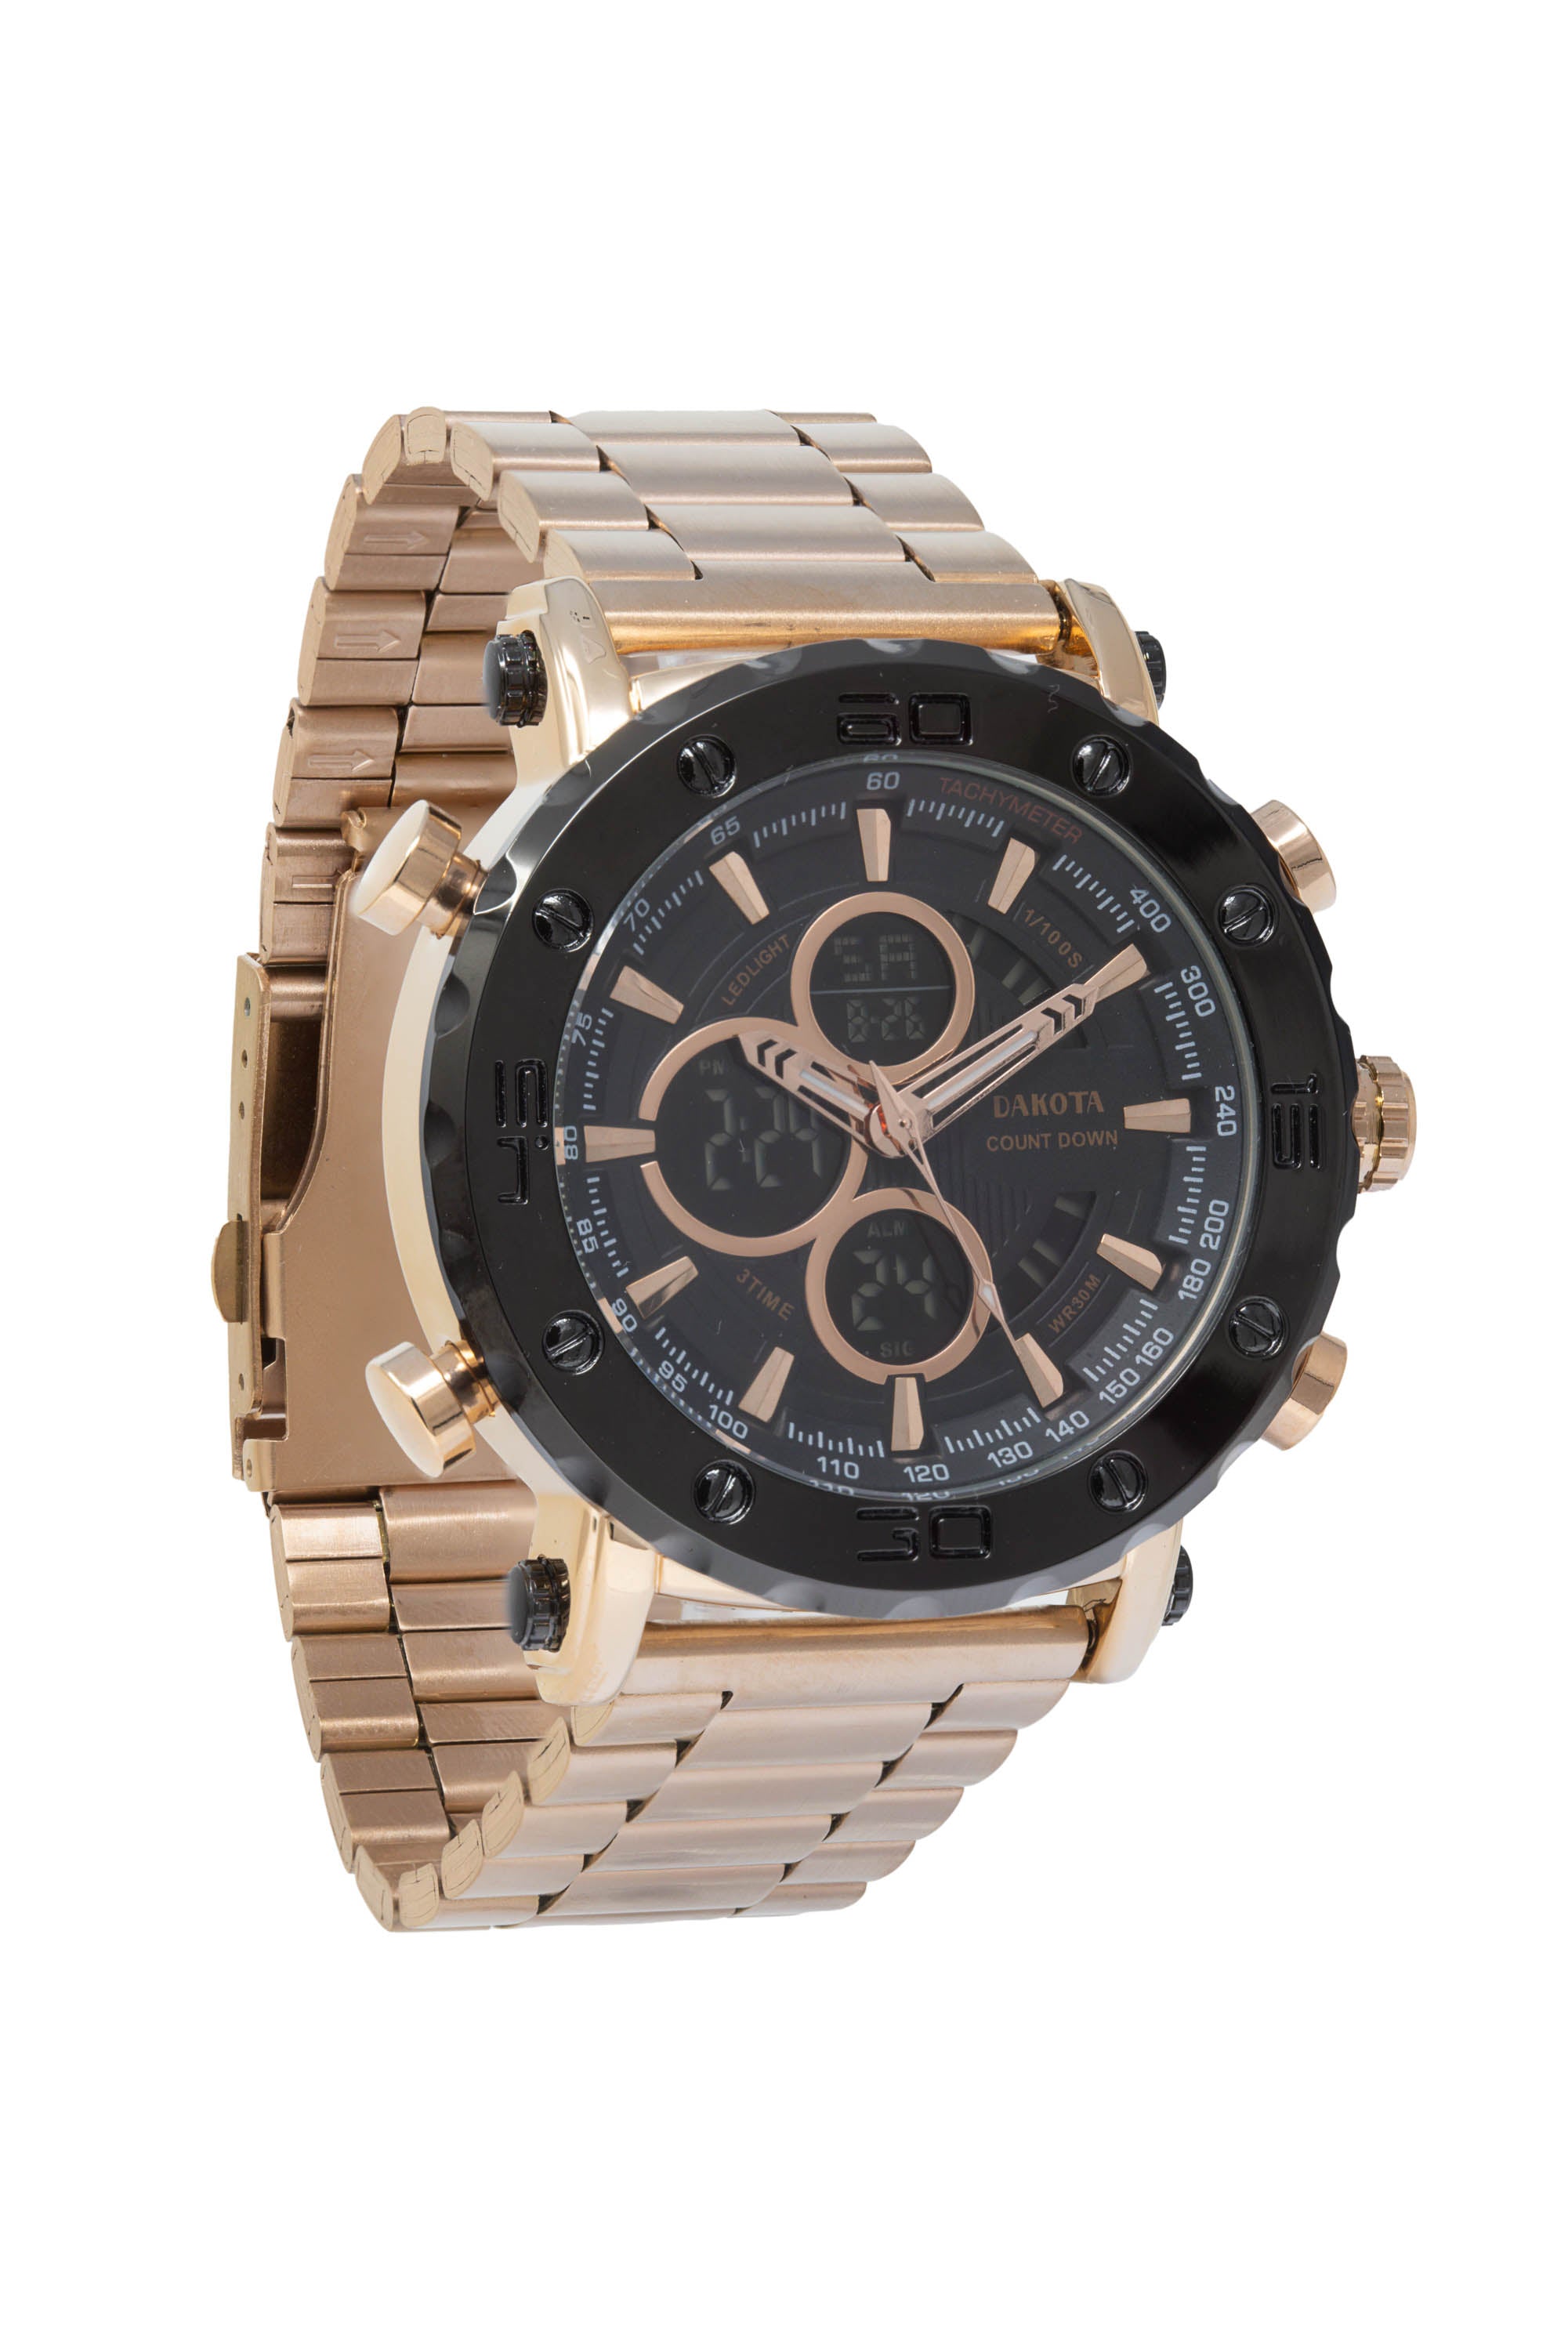 The Reverse-Flash™ Three-Hand Stainless Steel Watch - LE1163 - Fossil